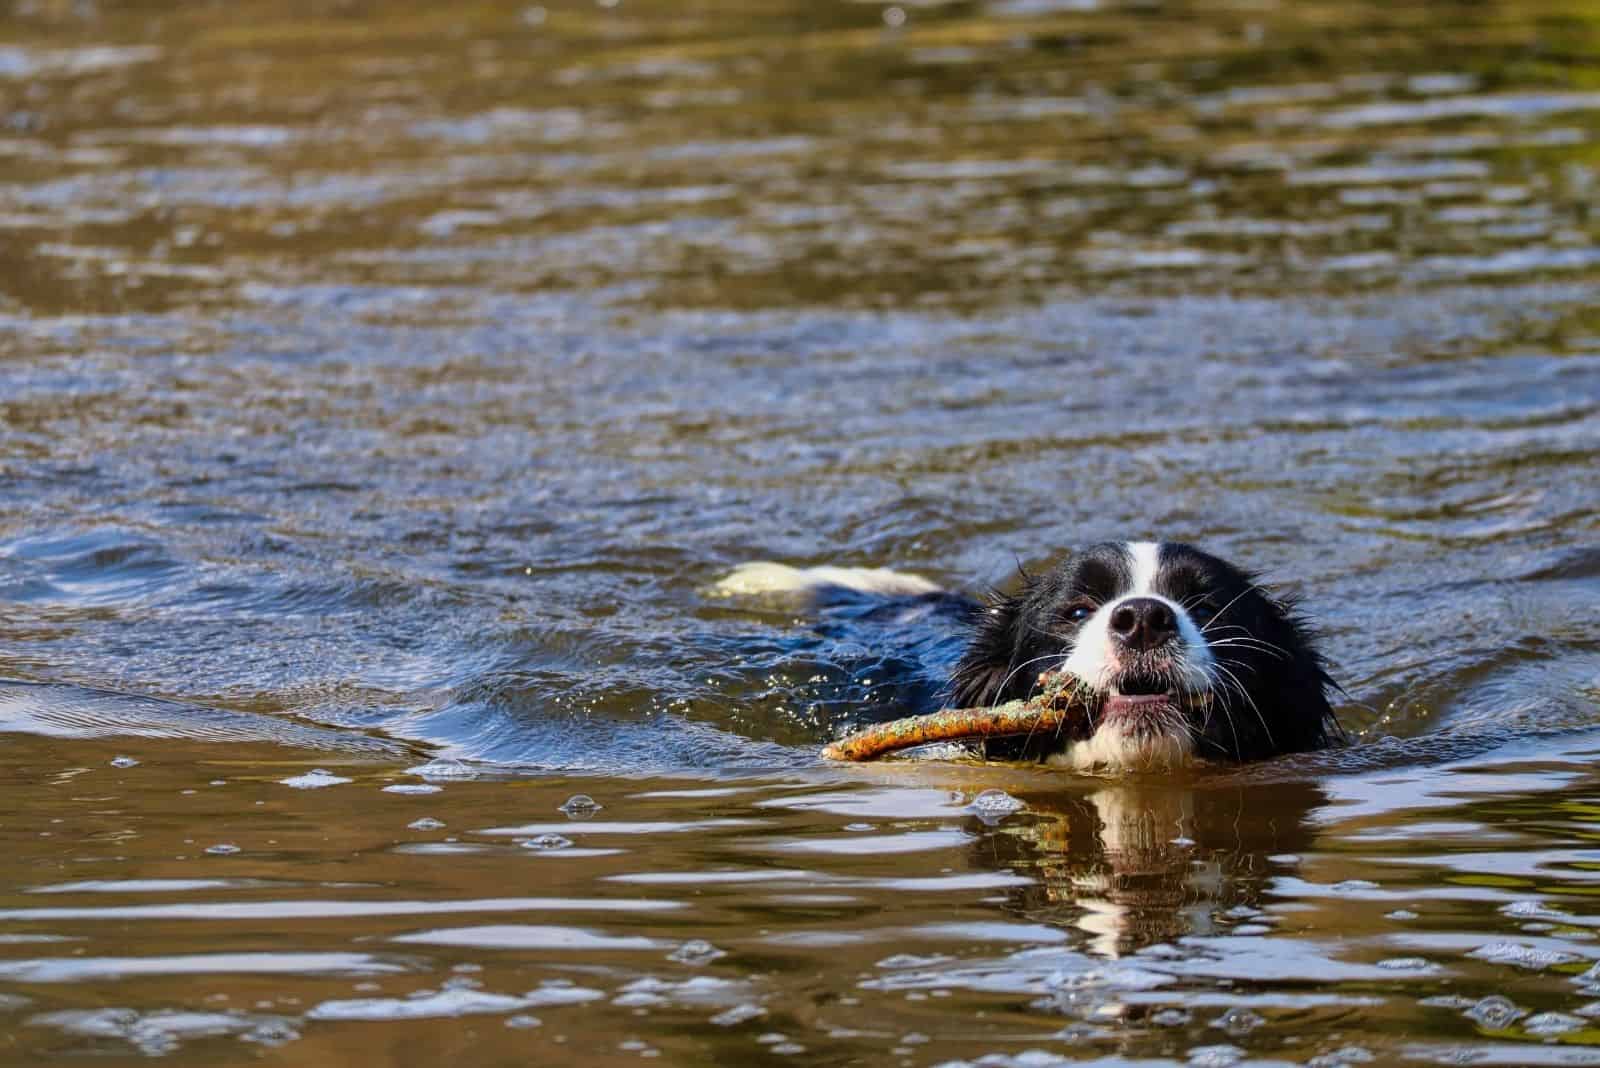 Border Collie Swimming in River With Stick in its Mouth